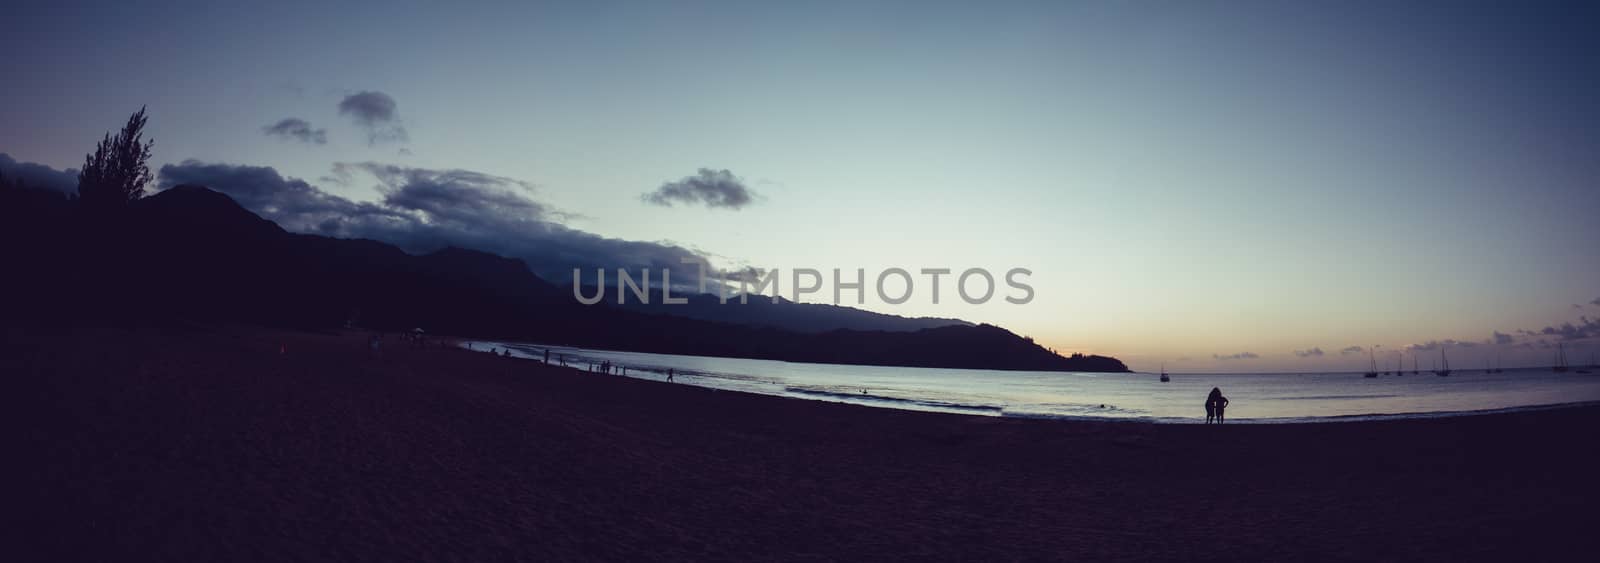 Sunset in the rounded coast of Hanalei bay in Kauai, US by mikelju